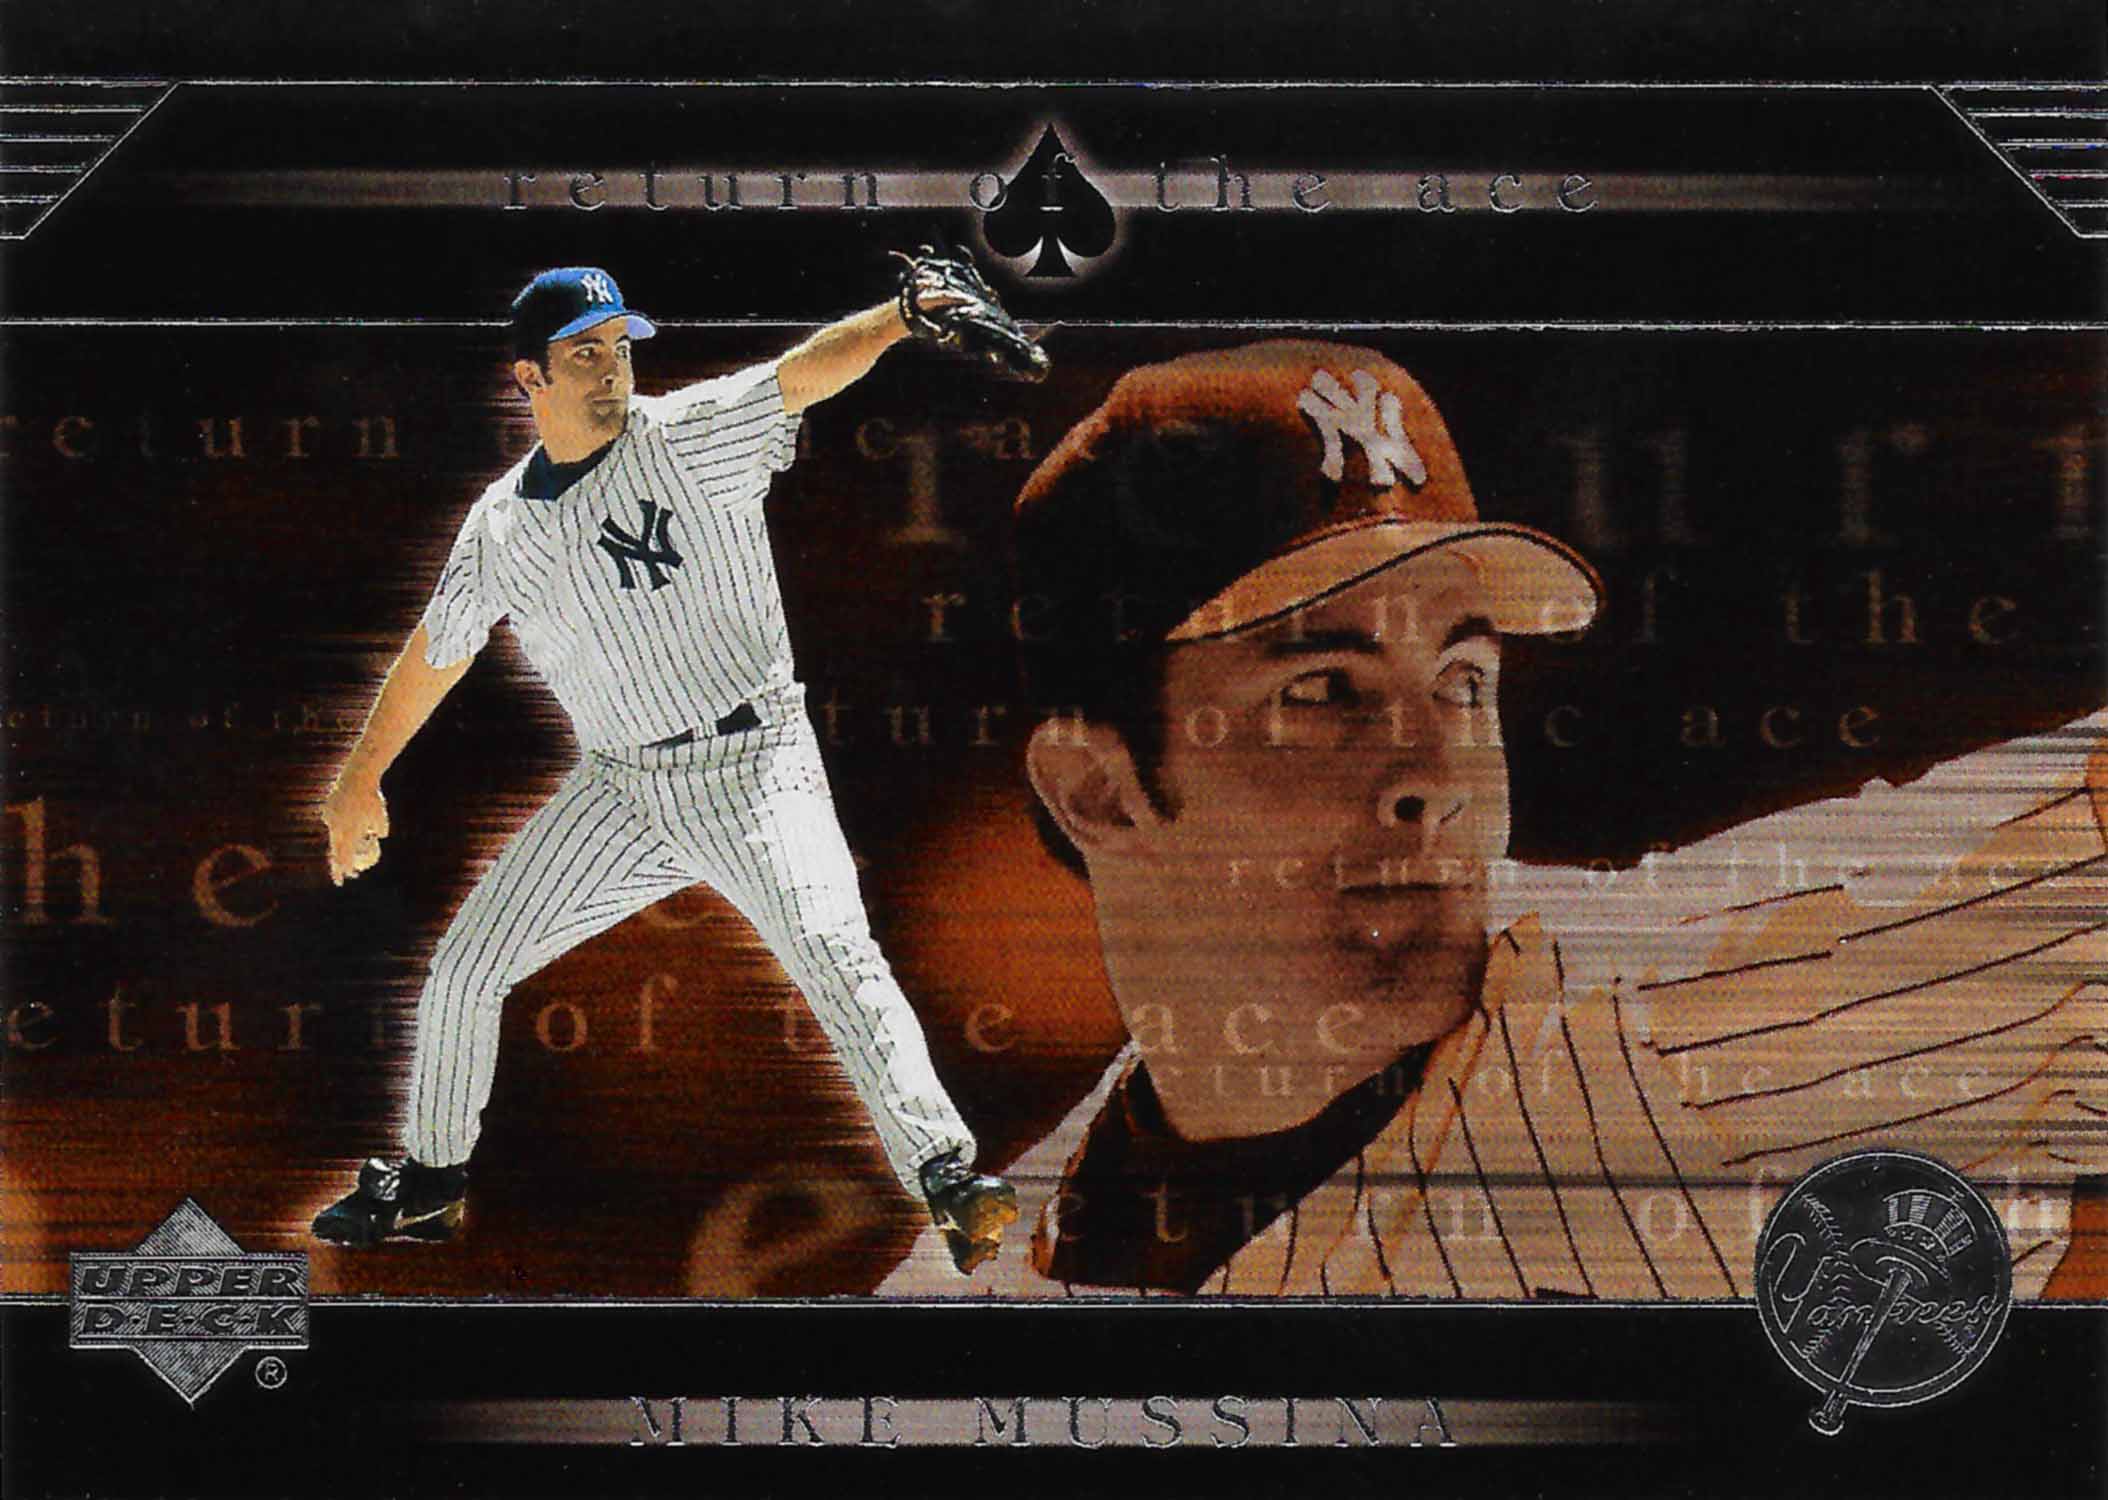 2002 Upper Deck Return of the Ace